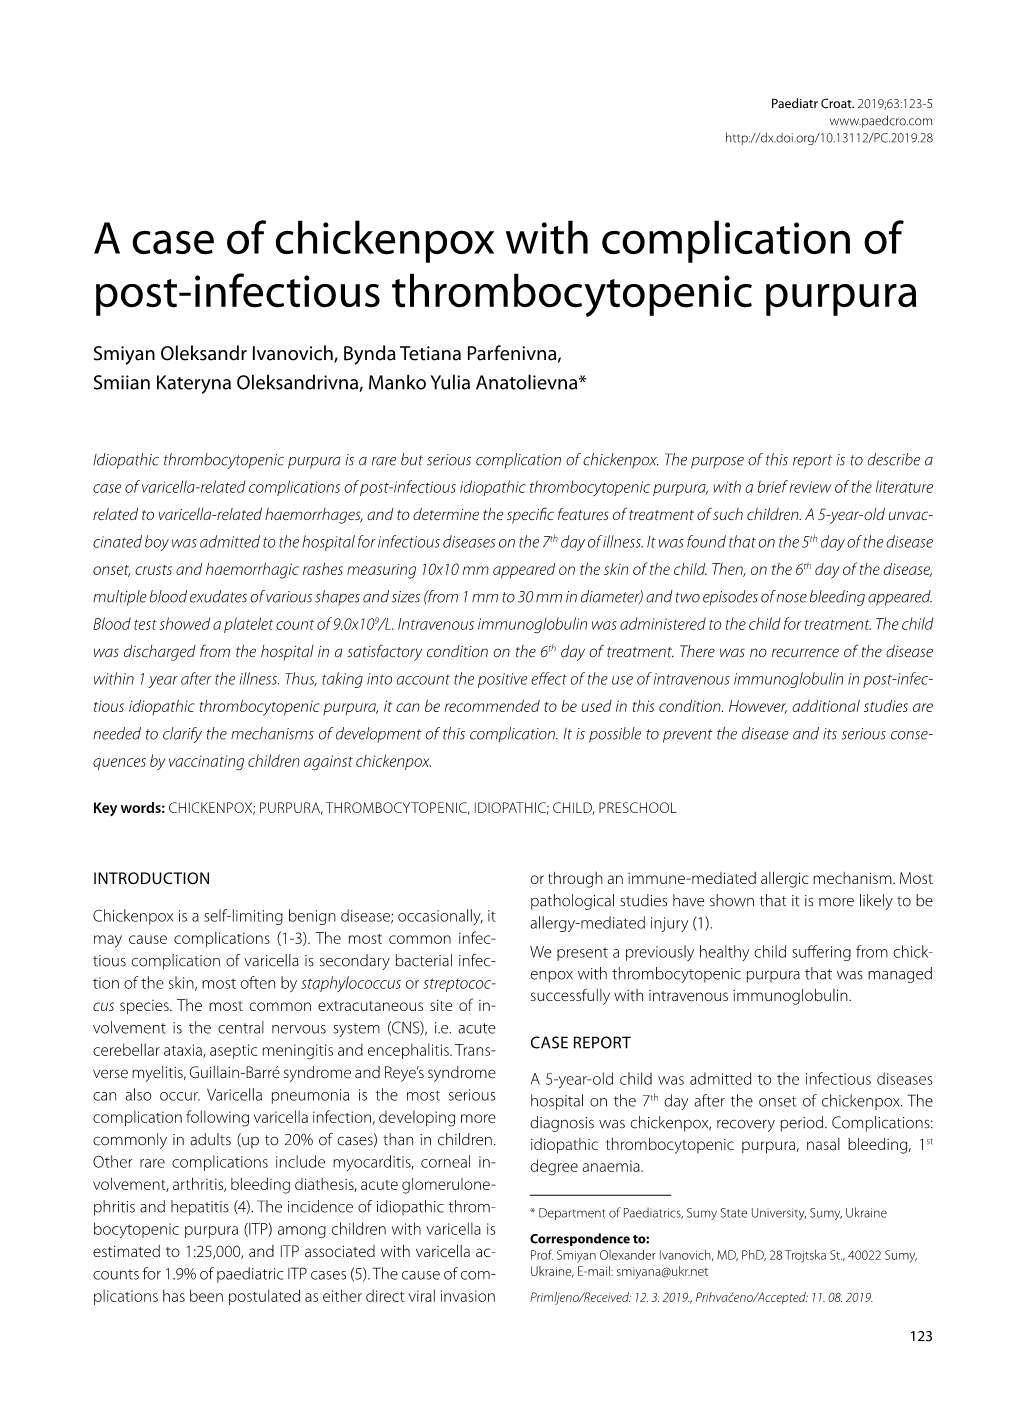 A Case of Chickenpox with Complication of Post-Infectious Thrombocytopenic Purpura